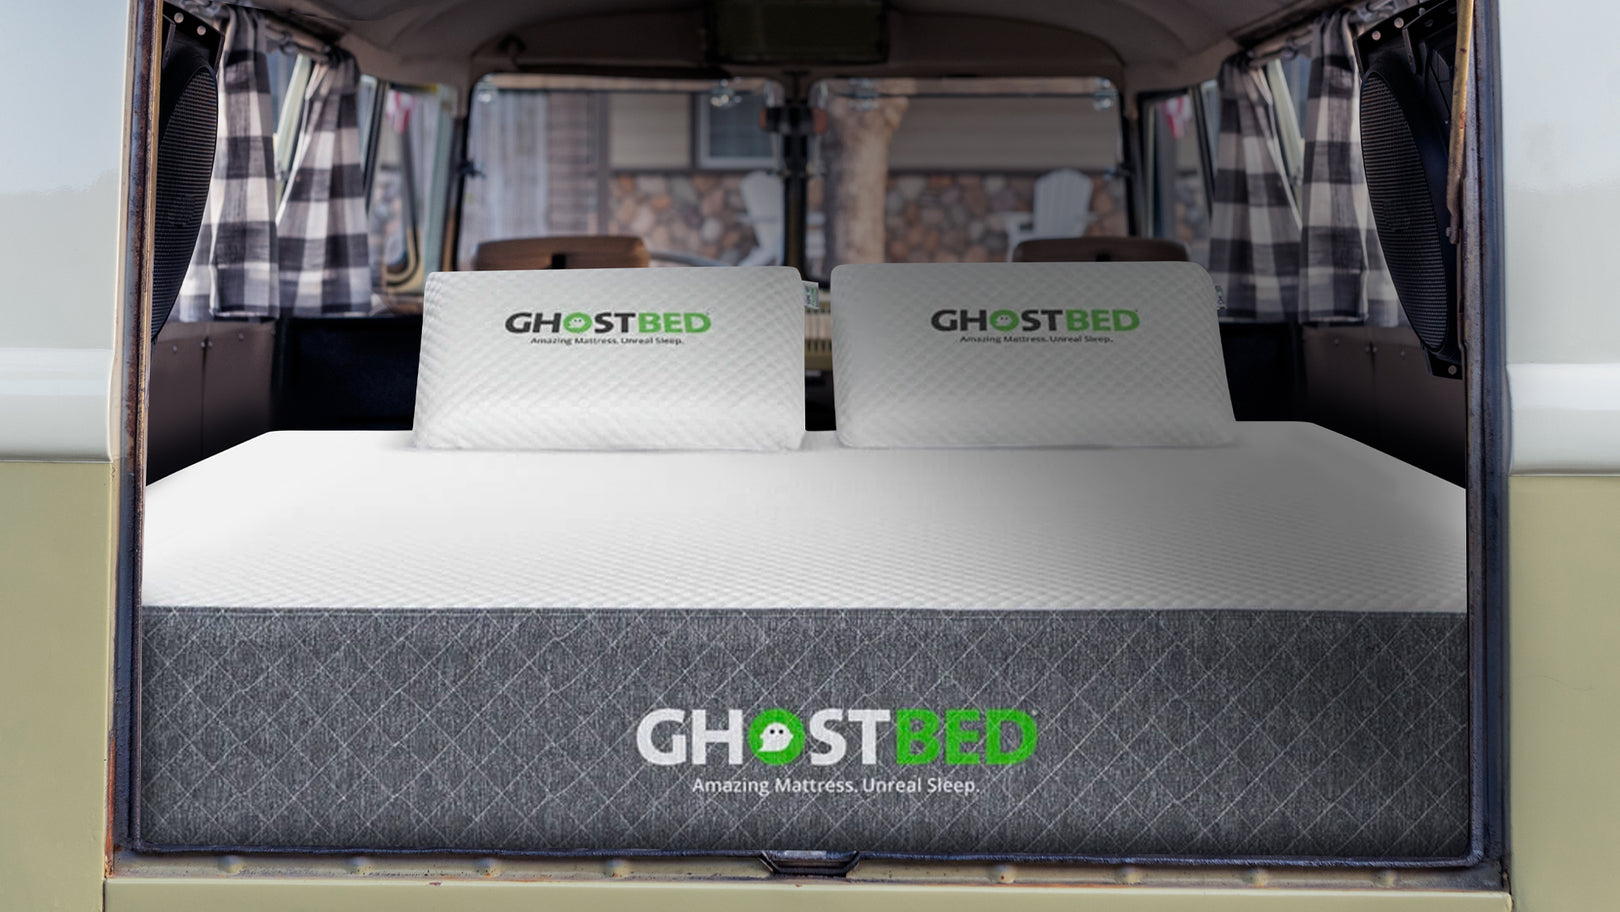 GhostBed RV